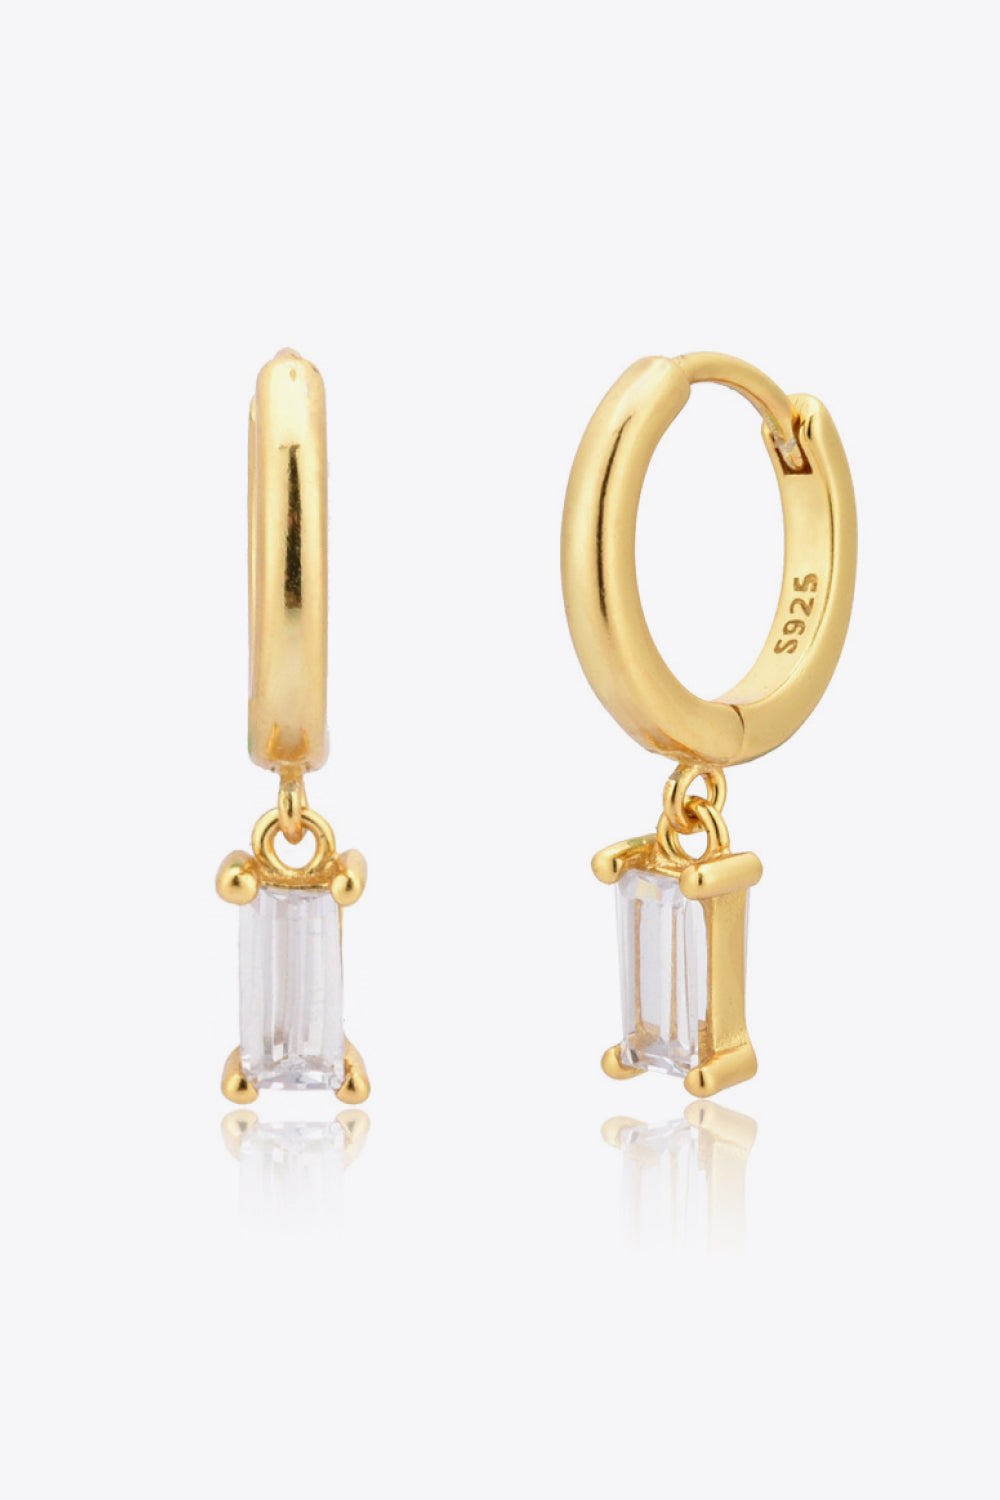 Explore our collection of trendy huggie earrings. Designed for both style and comfort, these earrings are perfect for any occasion. Shop now!